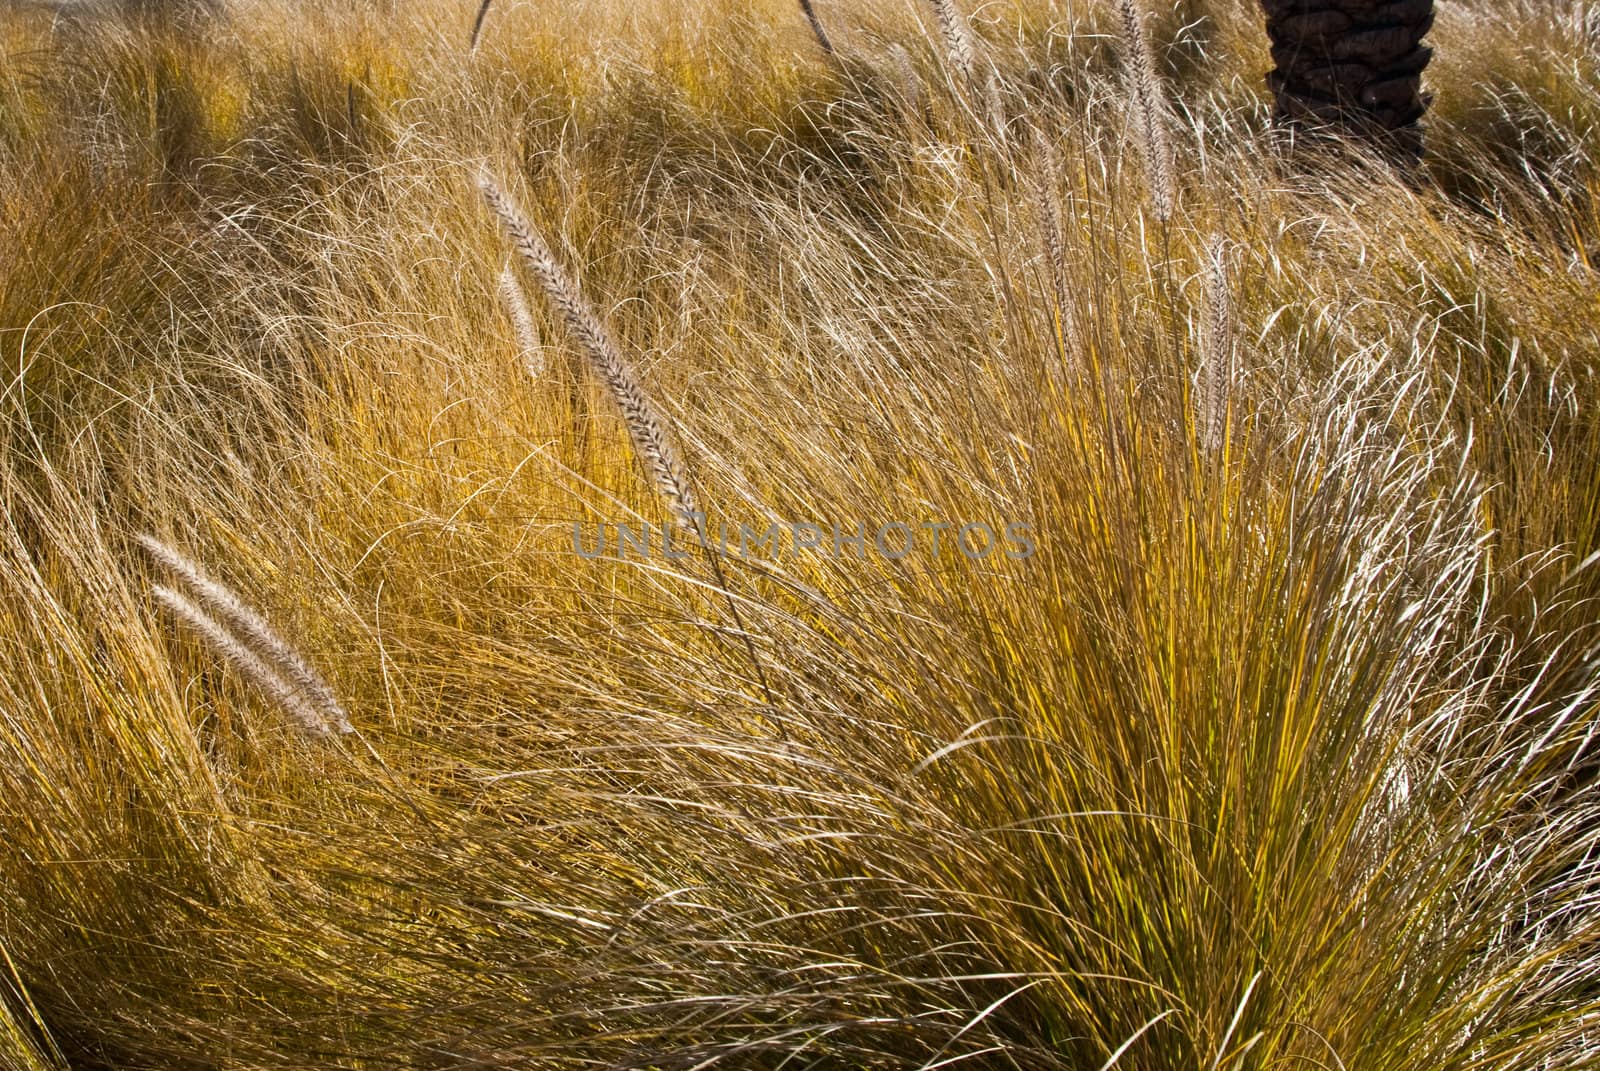 Grasses wave in afternoon sun